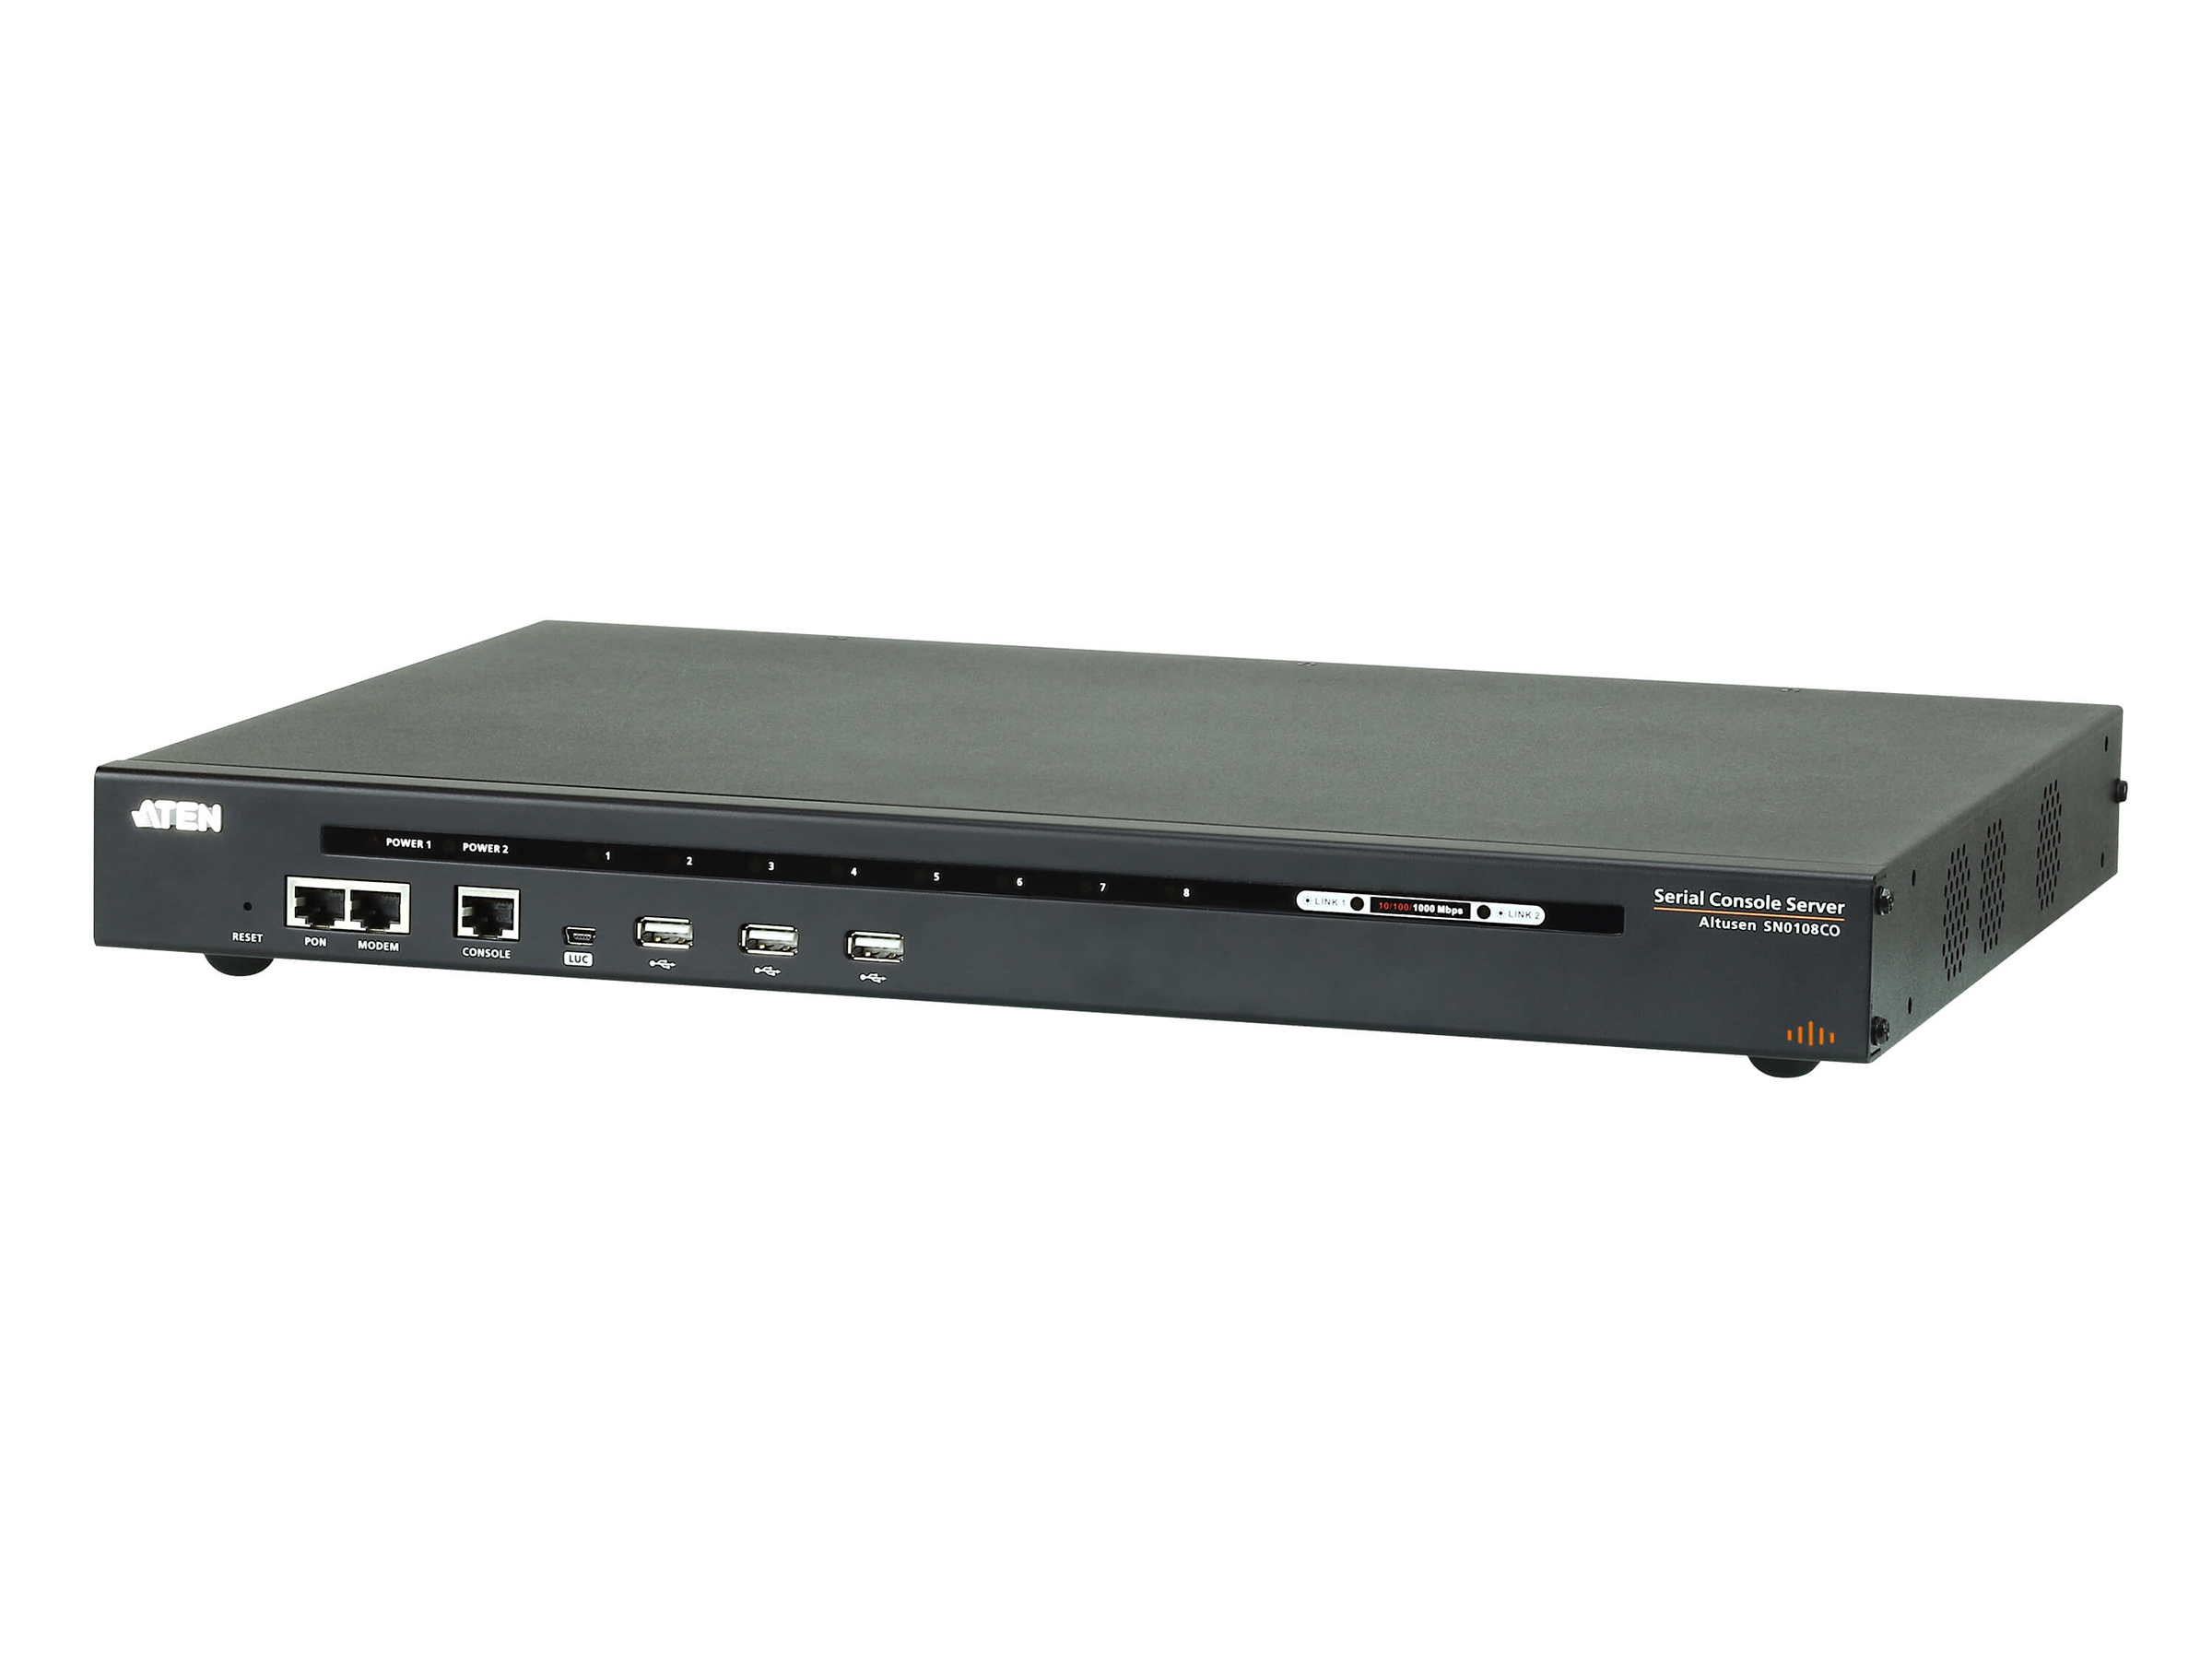 SN0108CO 8-Port Serial Console Server with Dual Power/LAN by Aten